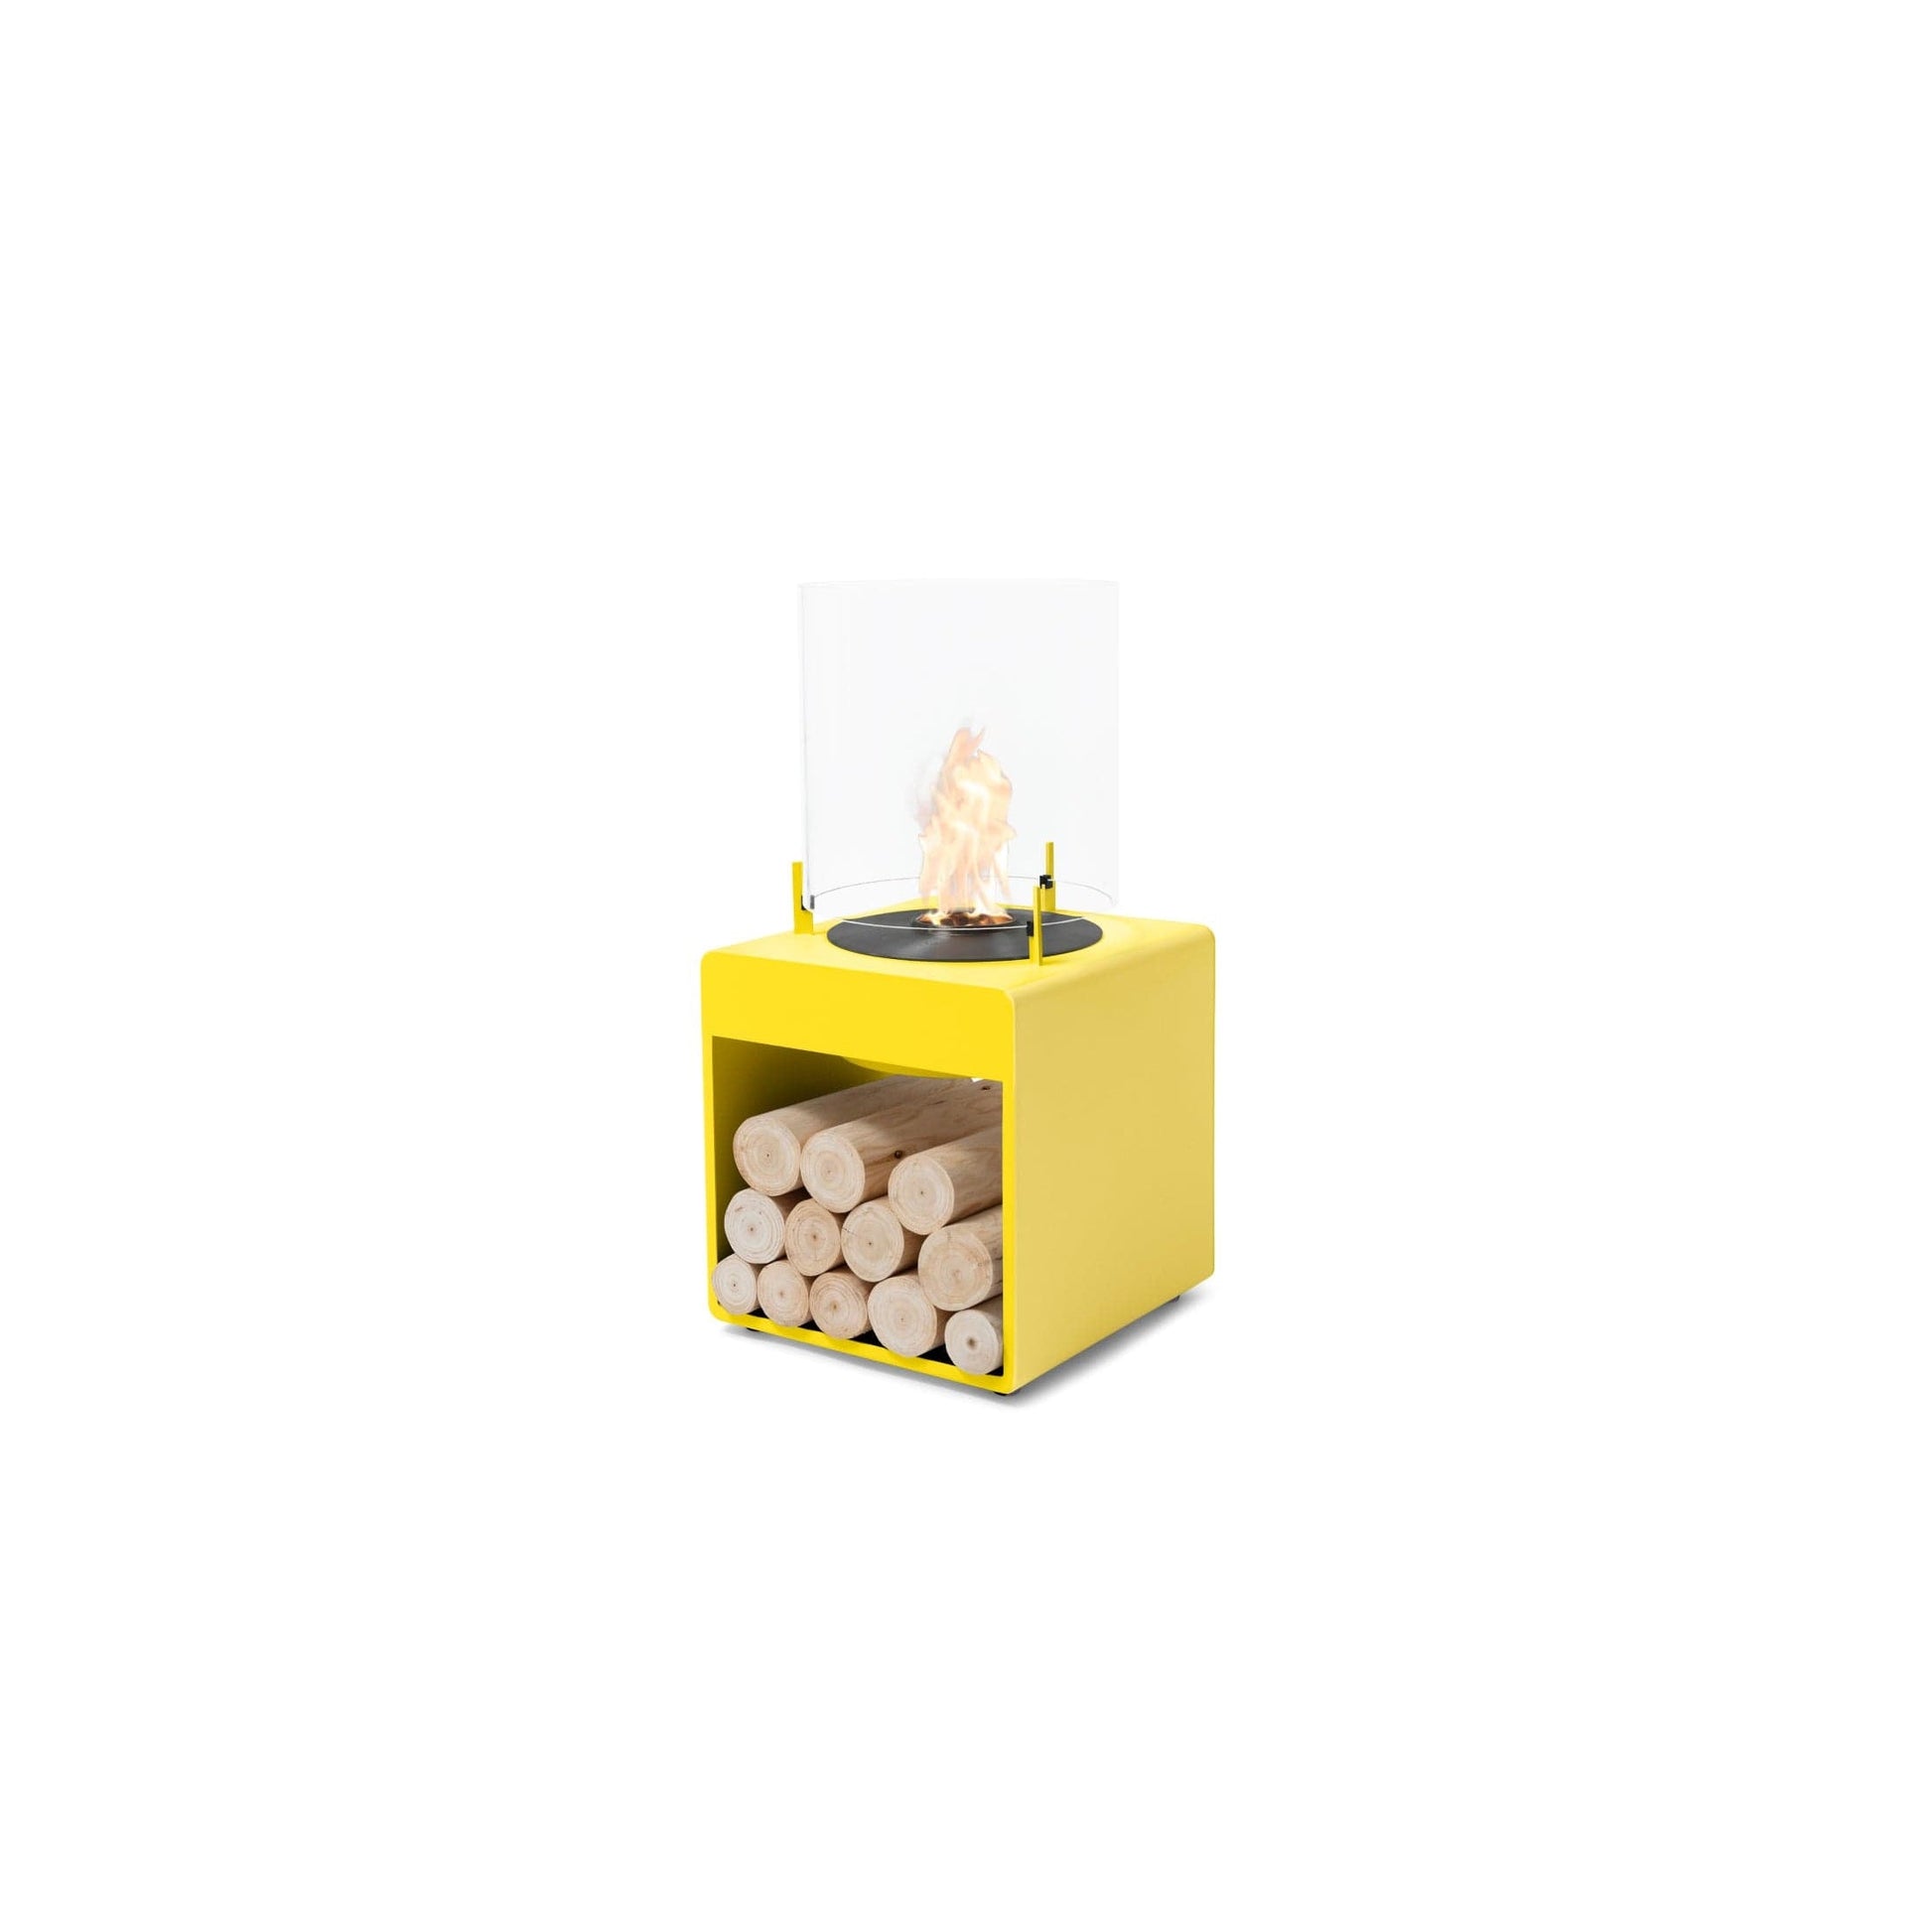 EcoSmart Fire POP 3L 27" Yellow Freestanding Designer Fireplace with Black Burner by MAD Design Group